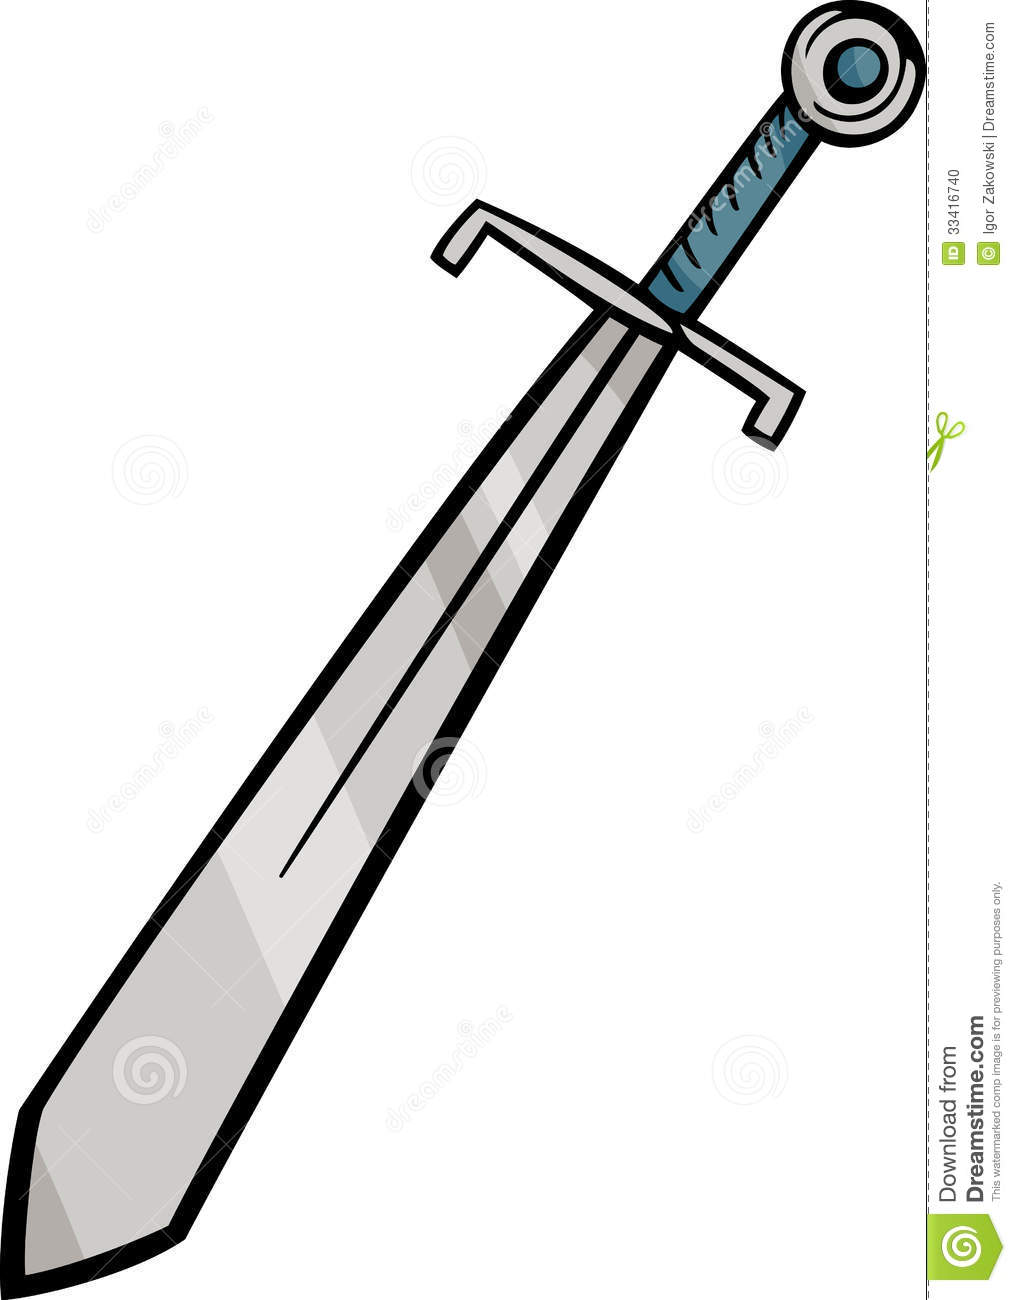 knights clipart weapon